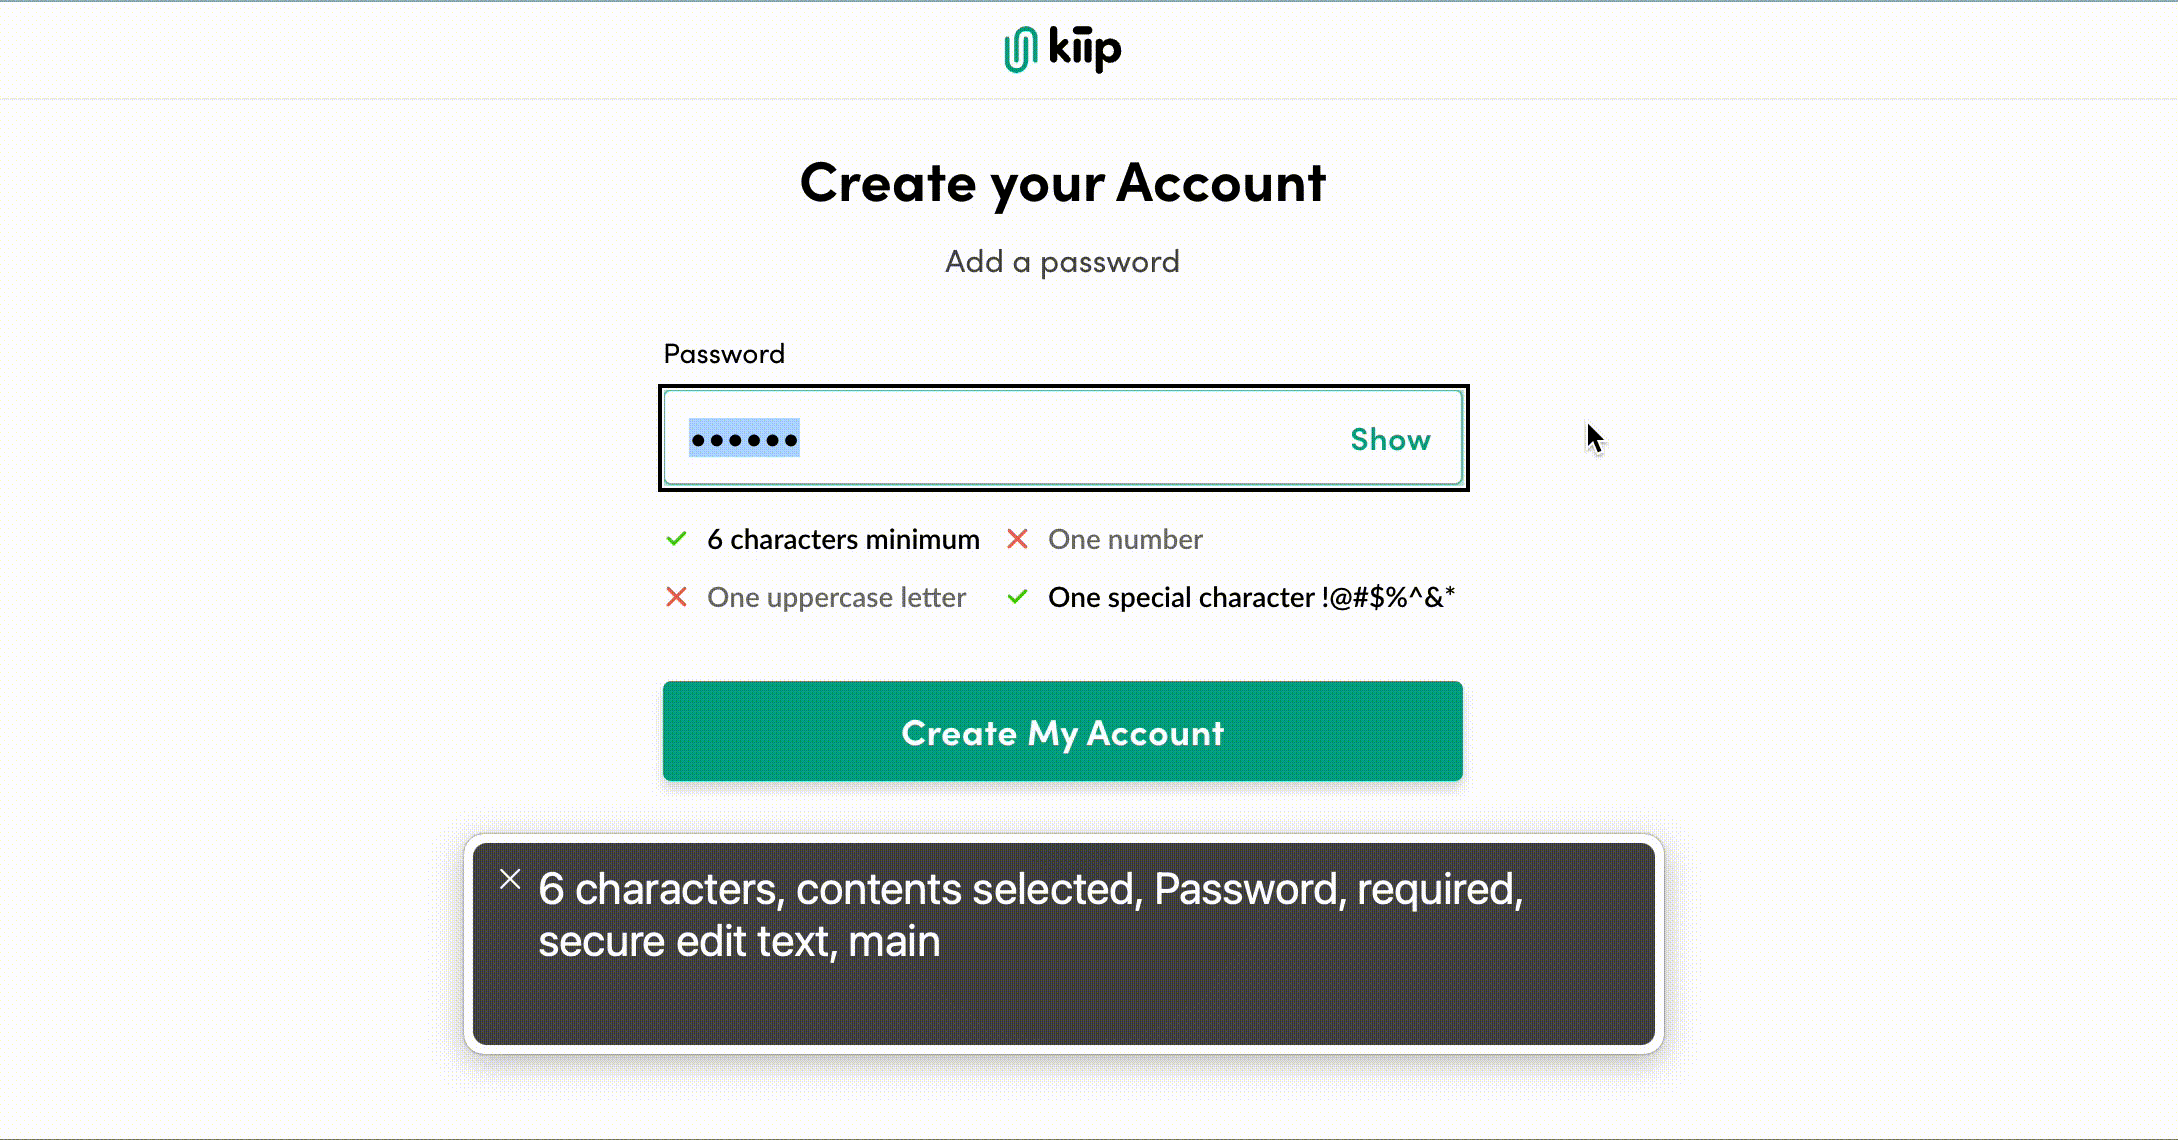 A demonstration of the 4 password input requirements and corresponding screen reader output navigating over them on the Kiip website.